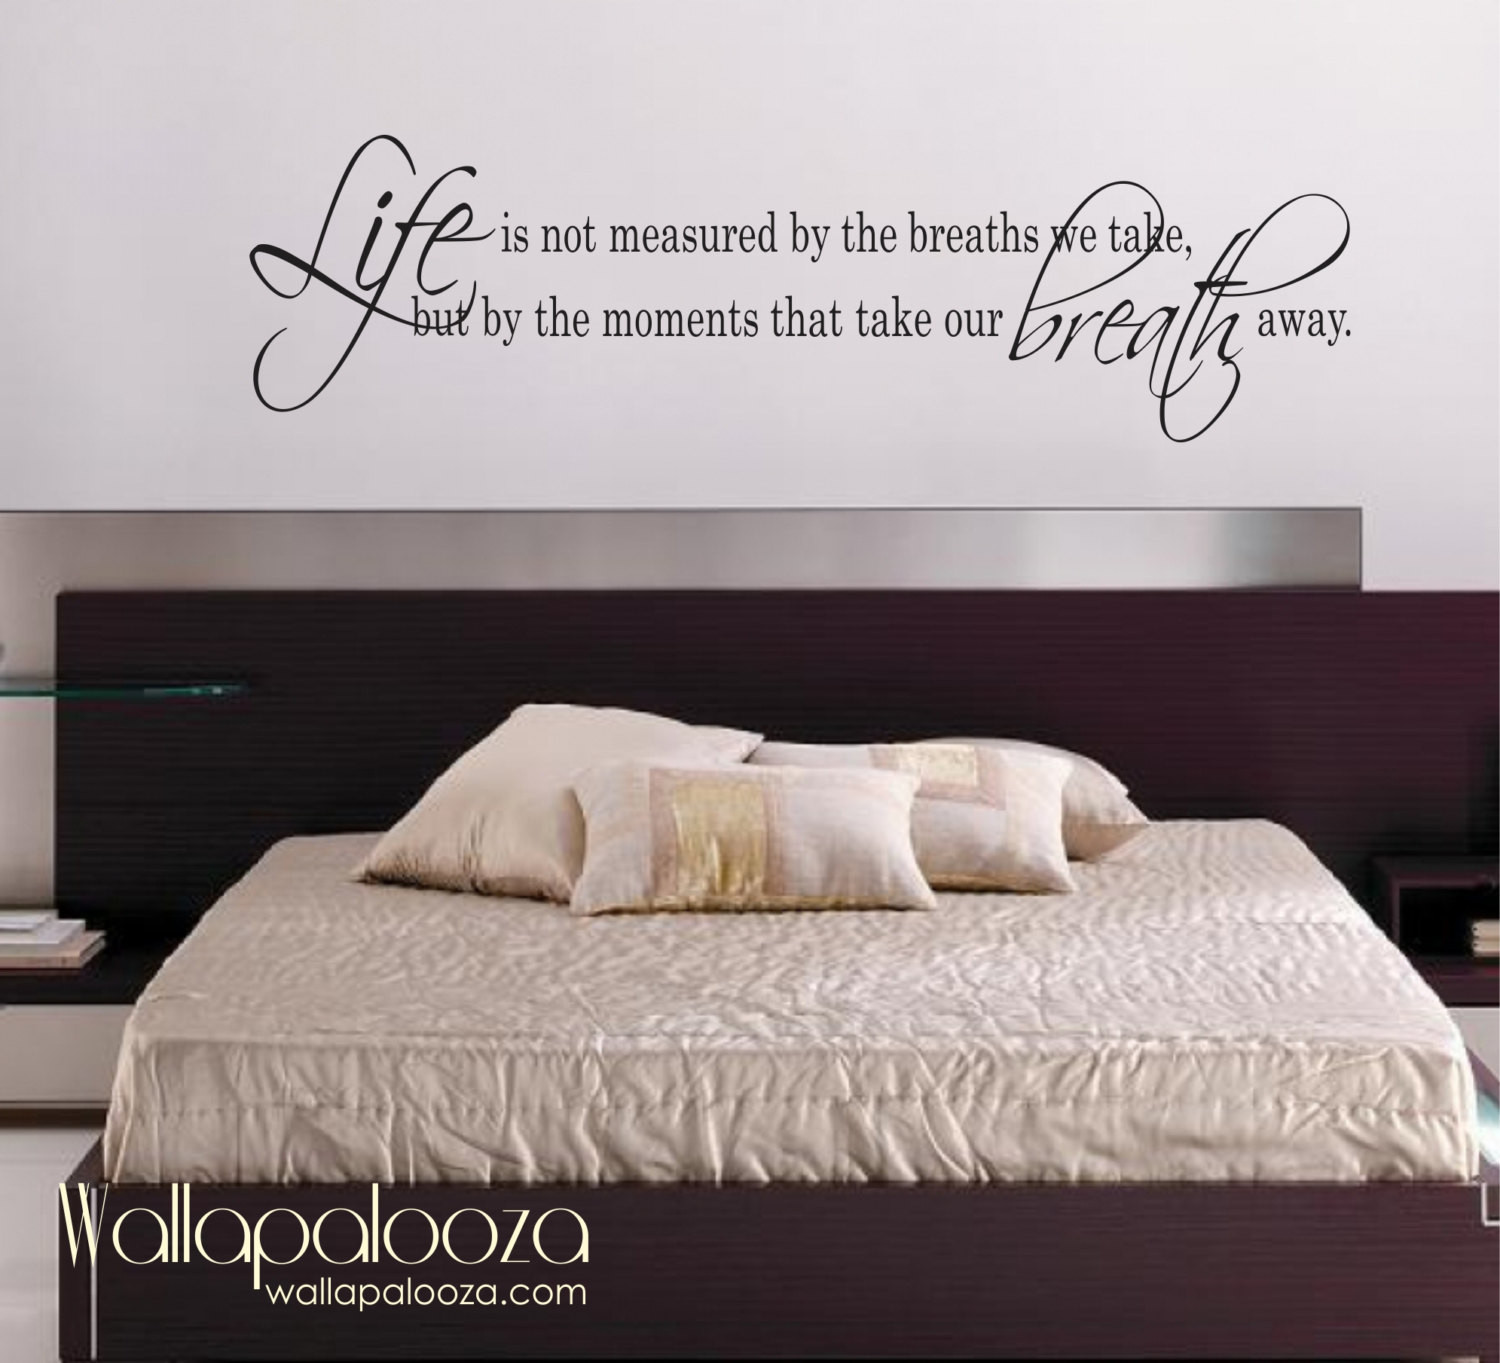 Bedroom Wall Decal
 Life Is Not measured wall decal love wall decal bedroom